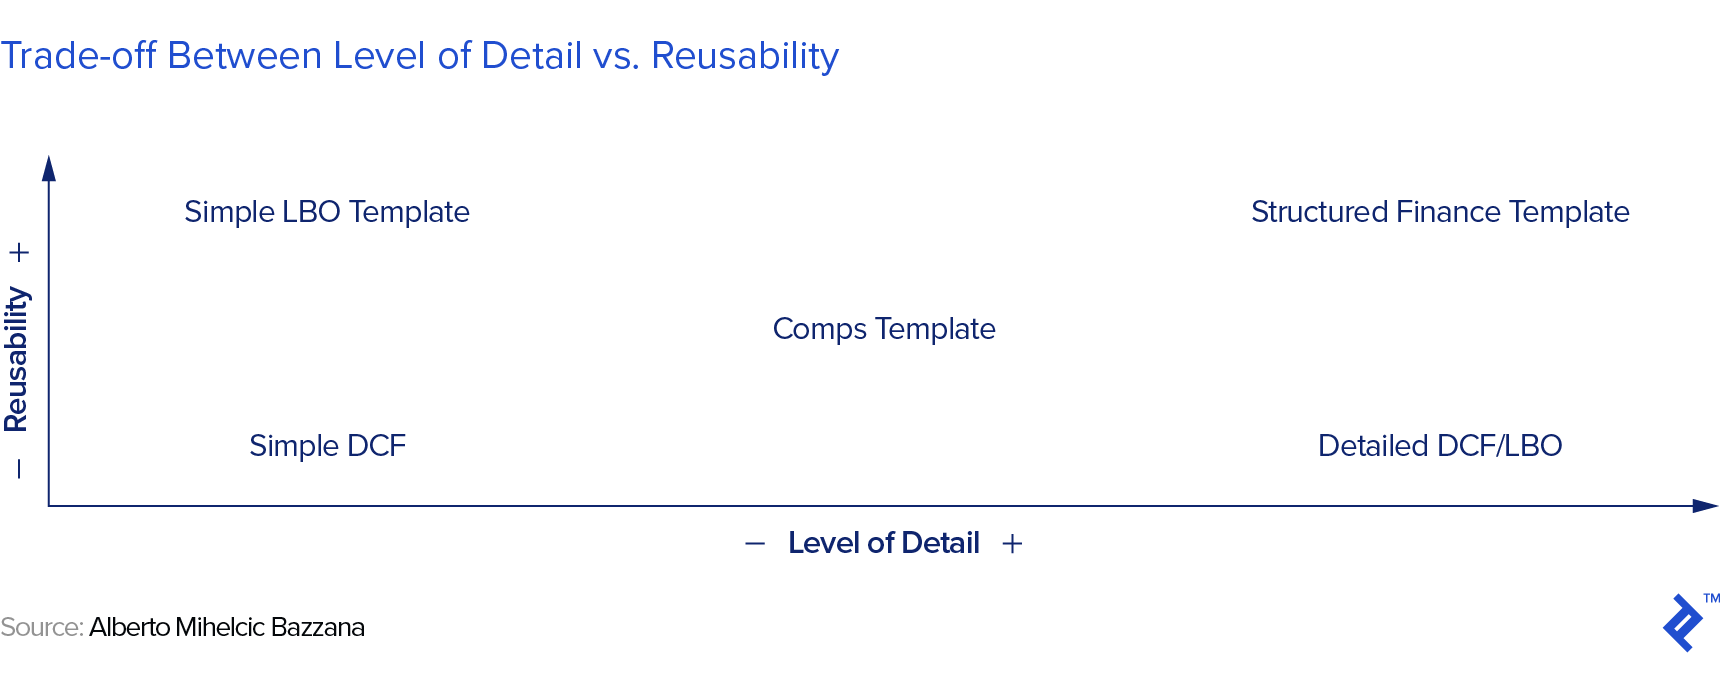 Graphic representation of the trade-off between level of detail vs. reusability